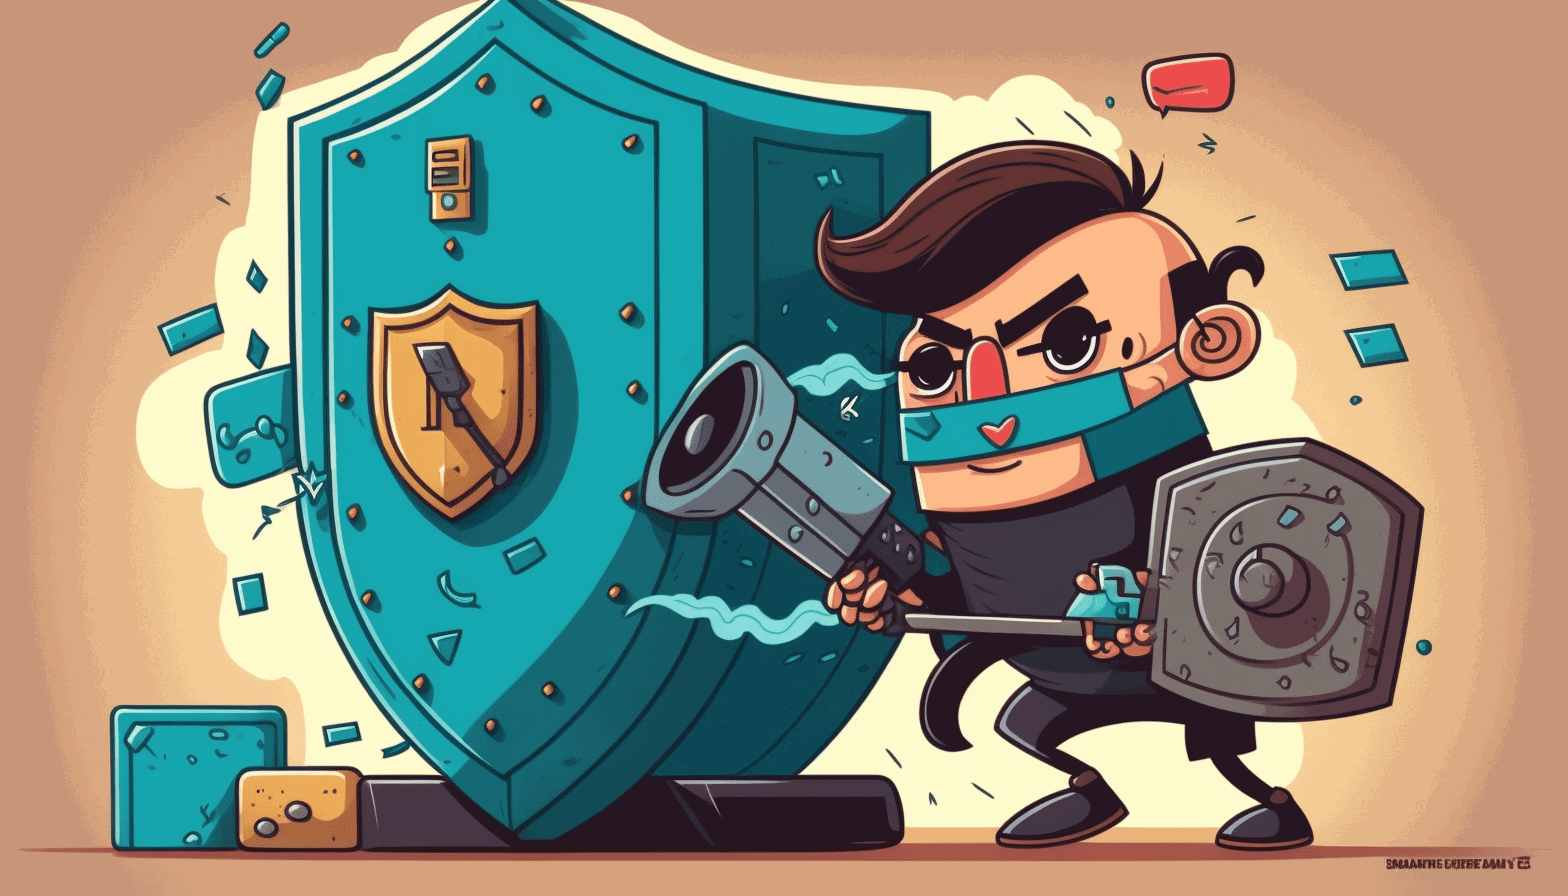 A cartoon hacker trying to break into a computer system while a shield with a lock protects it.